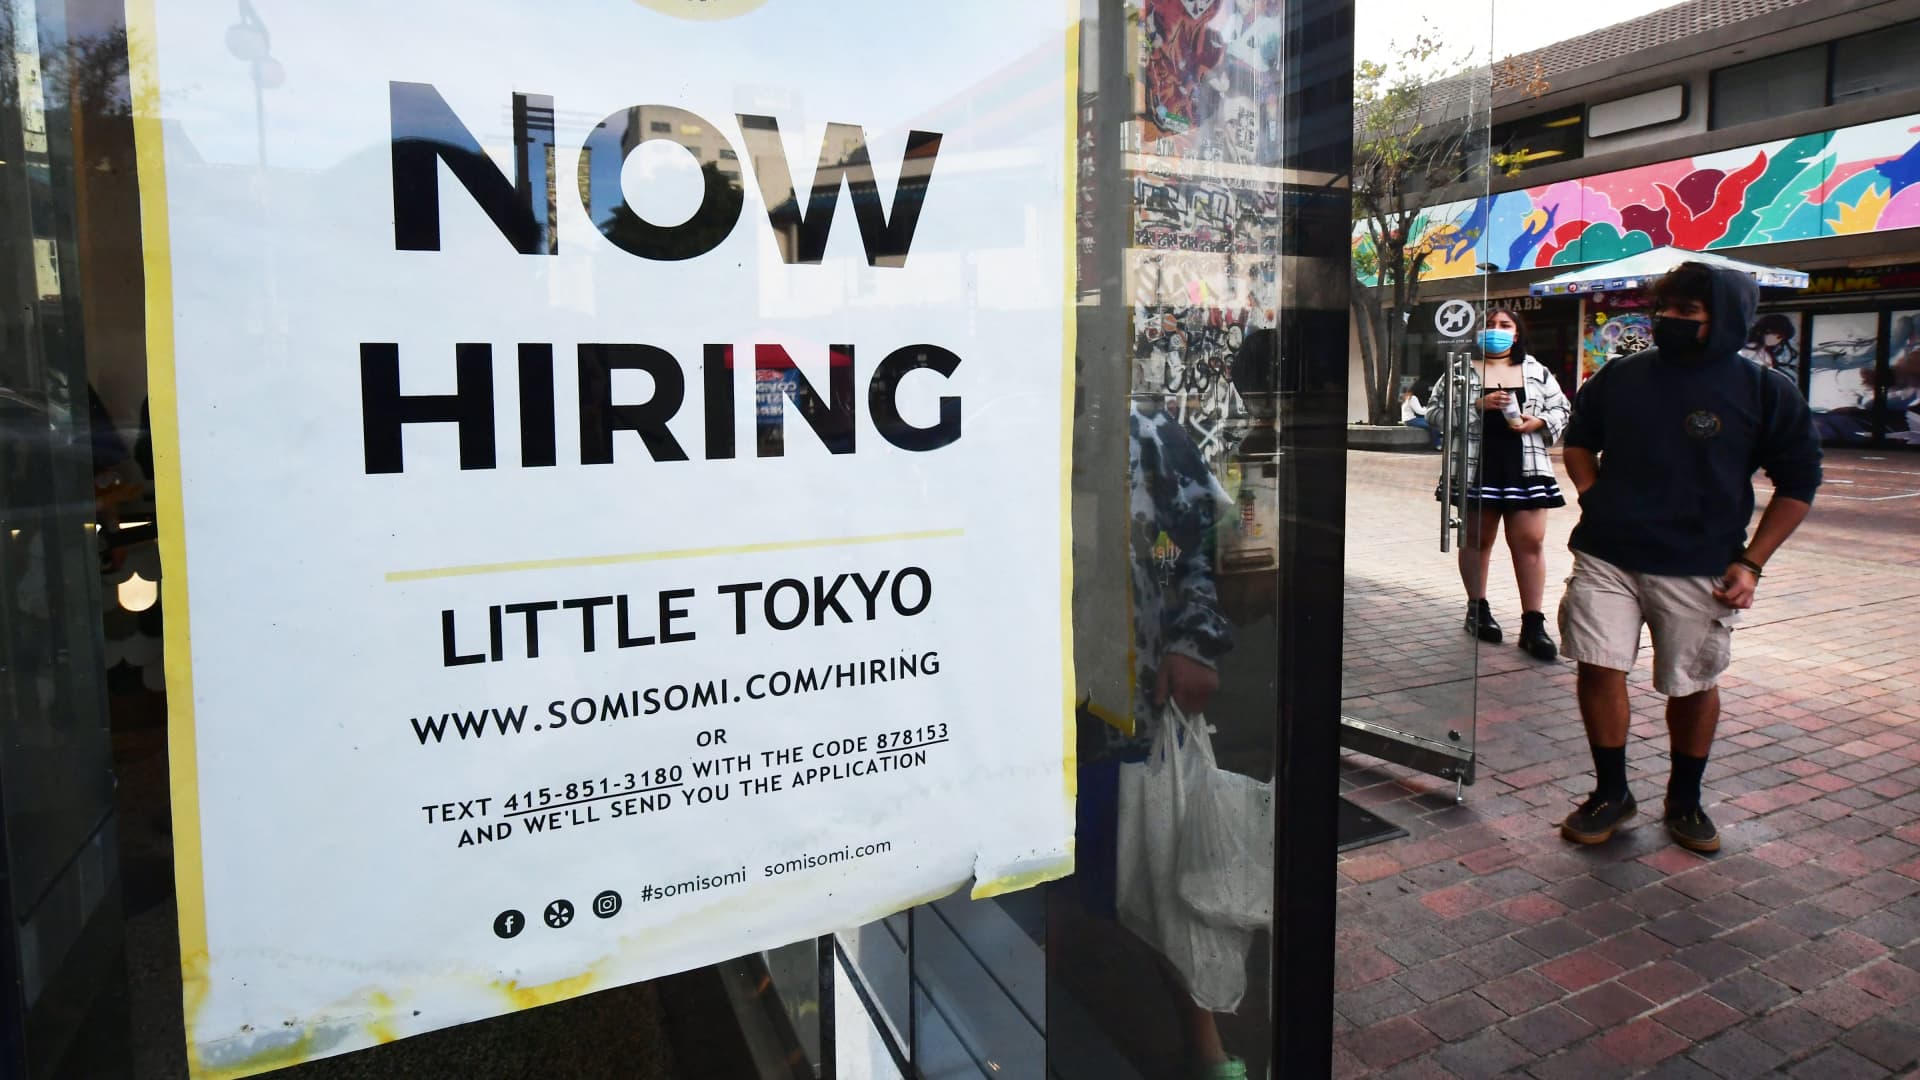 Job openings and the level of people leaving the job reached records in March